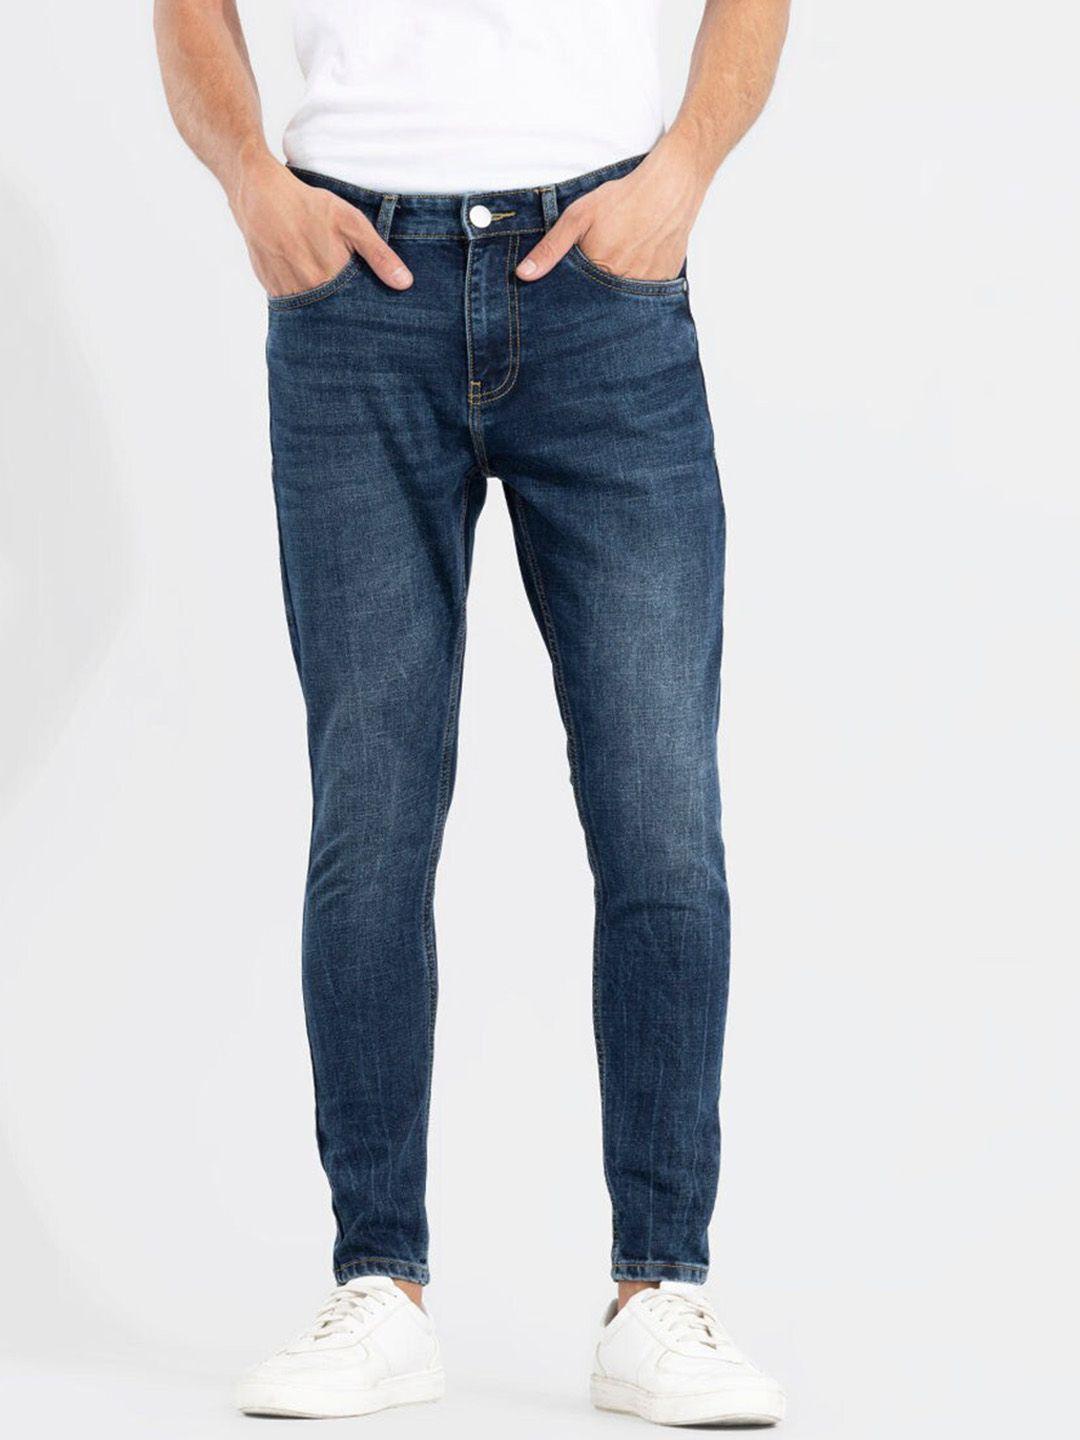 snitch-men-classic-skinny-fit-clean-look-stretchable-jeans